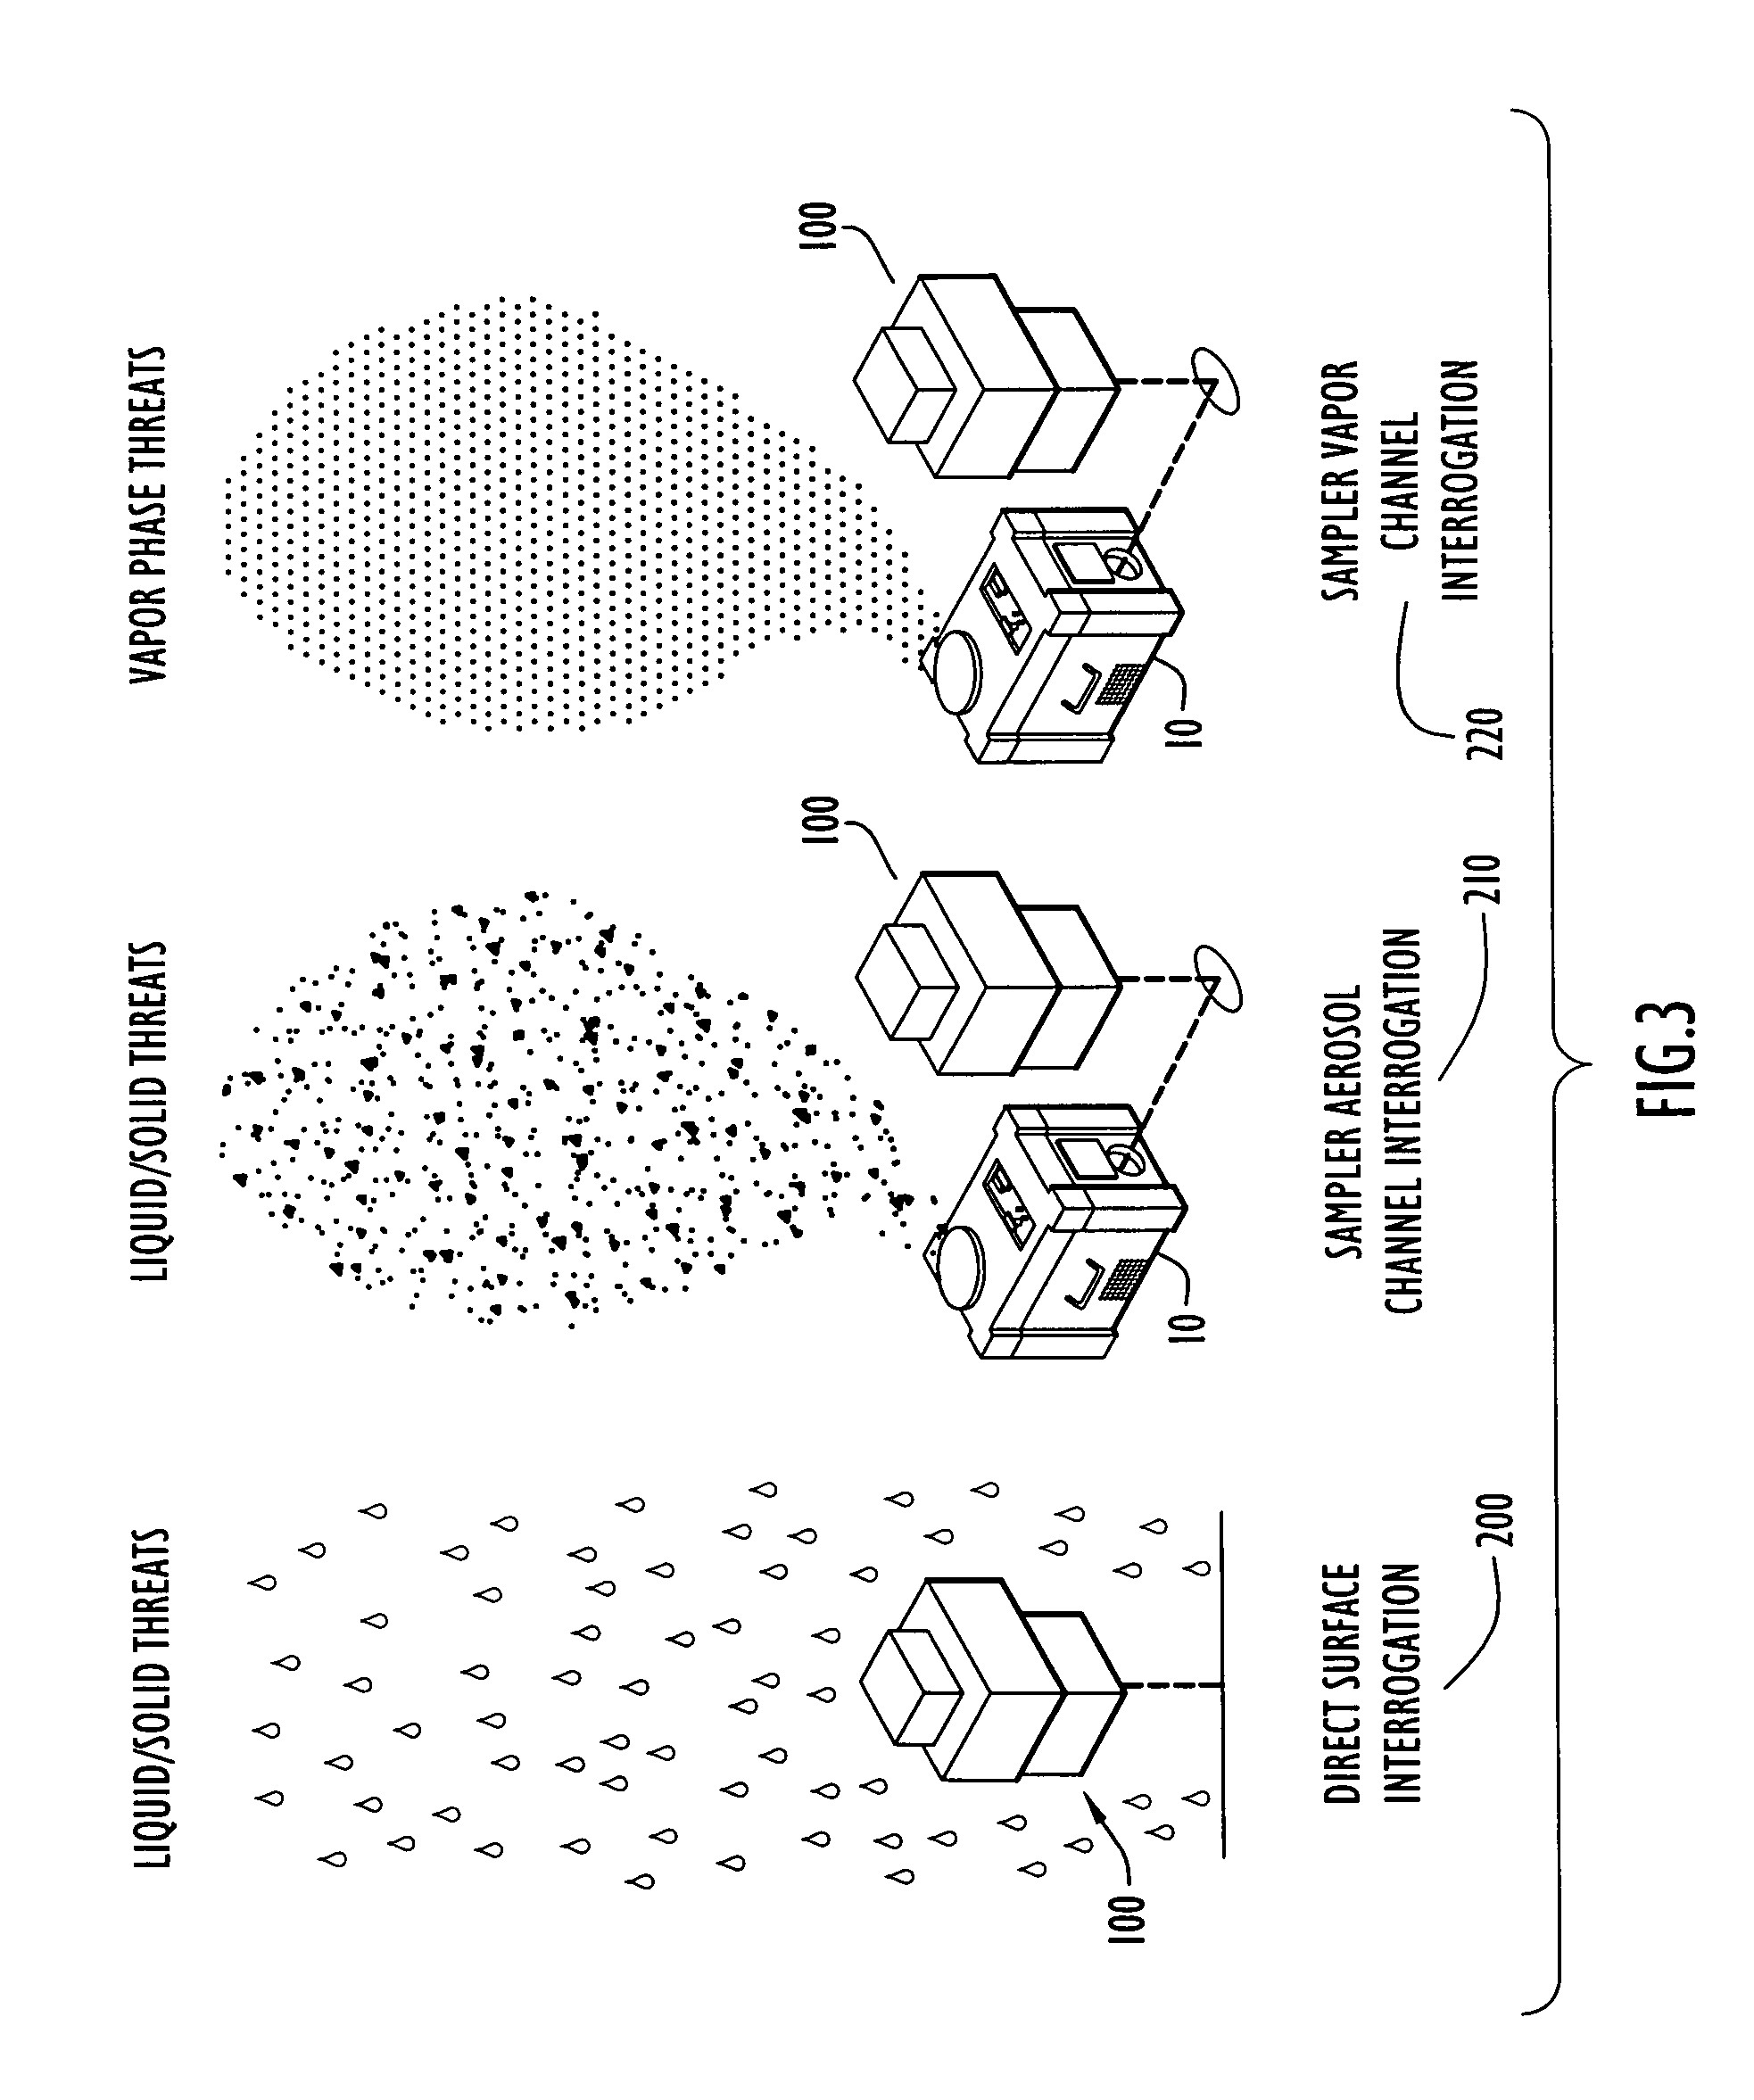 Air sampler module for enhancing the detection capabilities of a chemical detection device or system